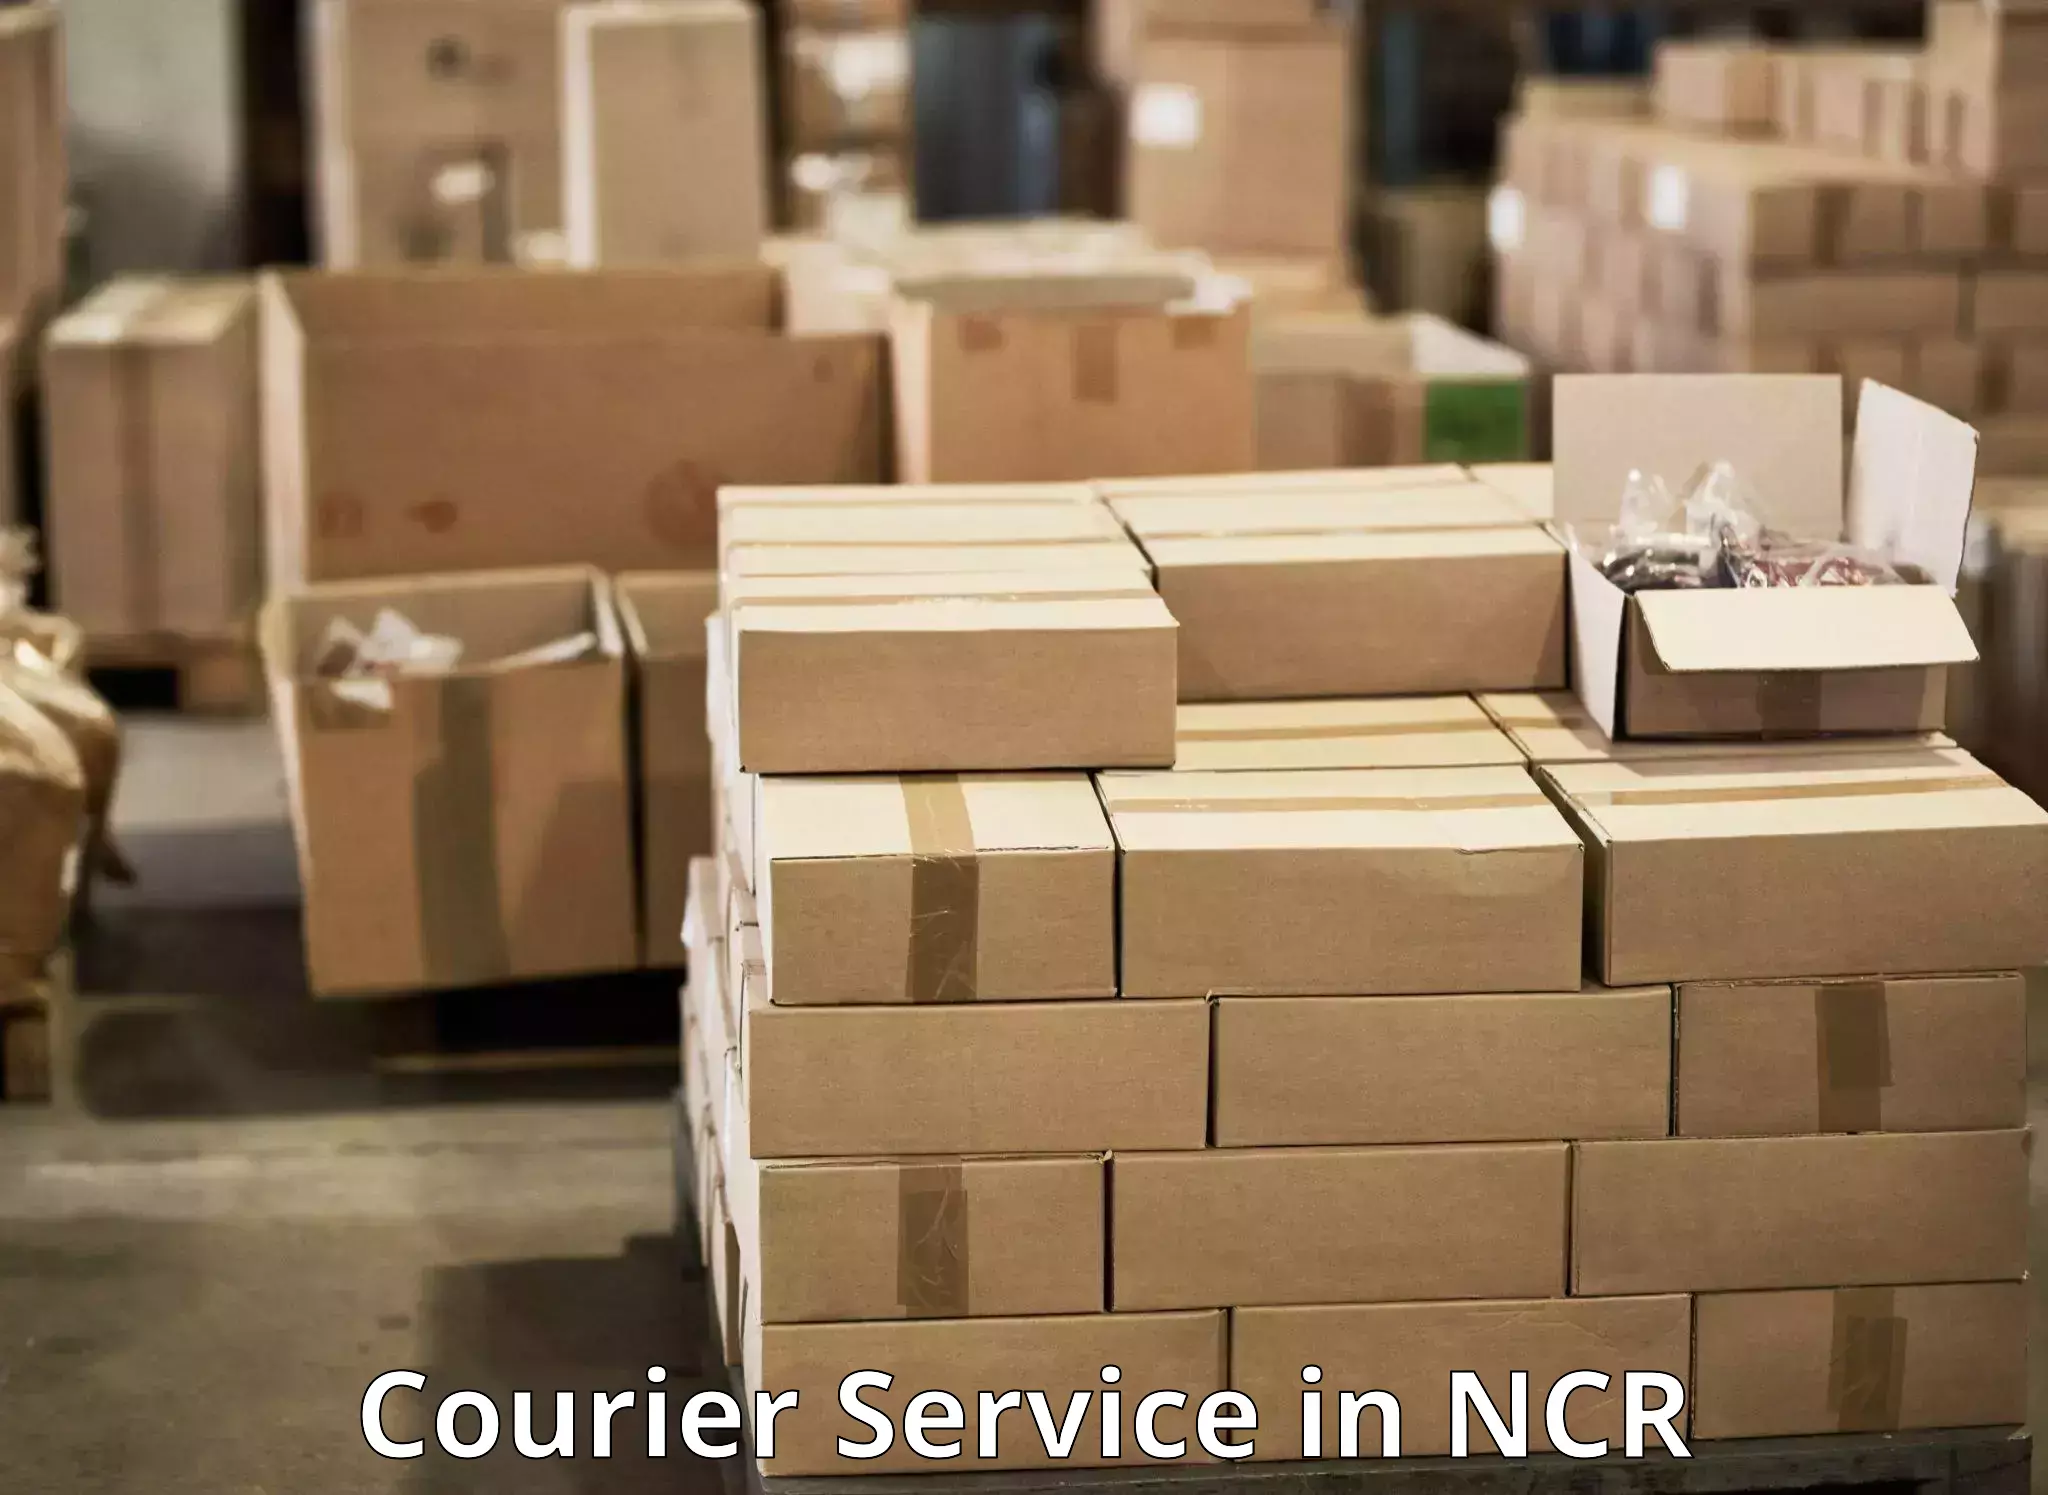 Parcel handling and care in NCR